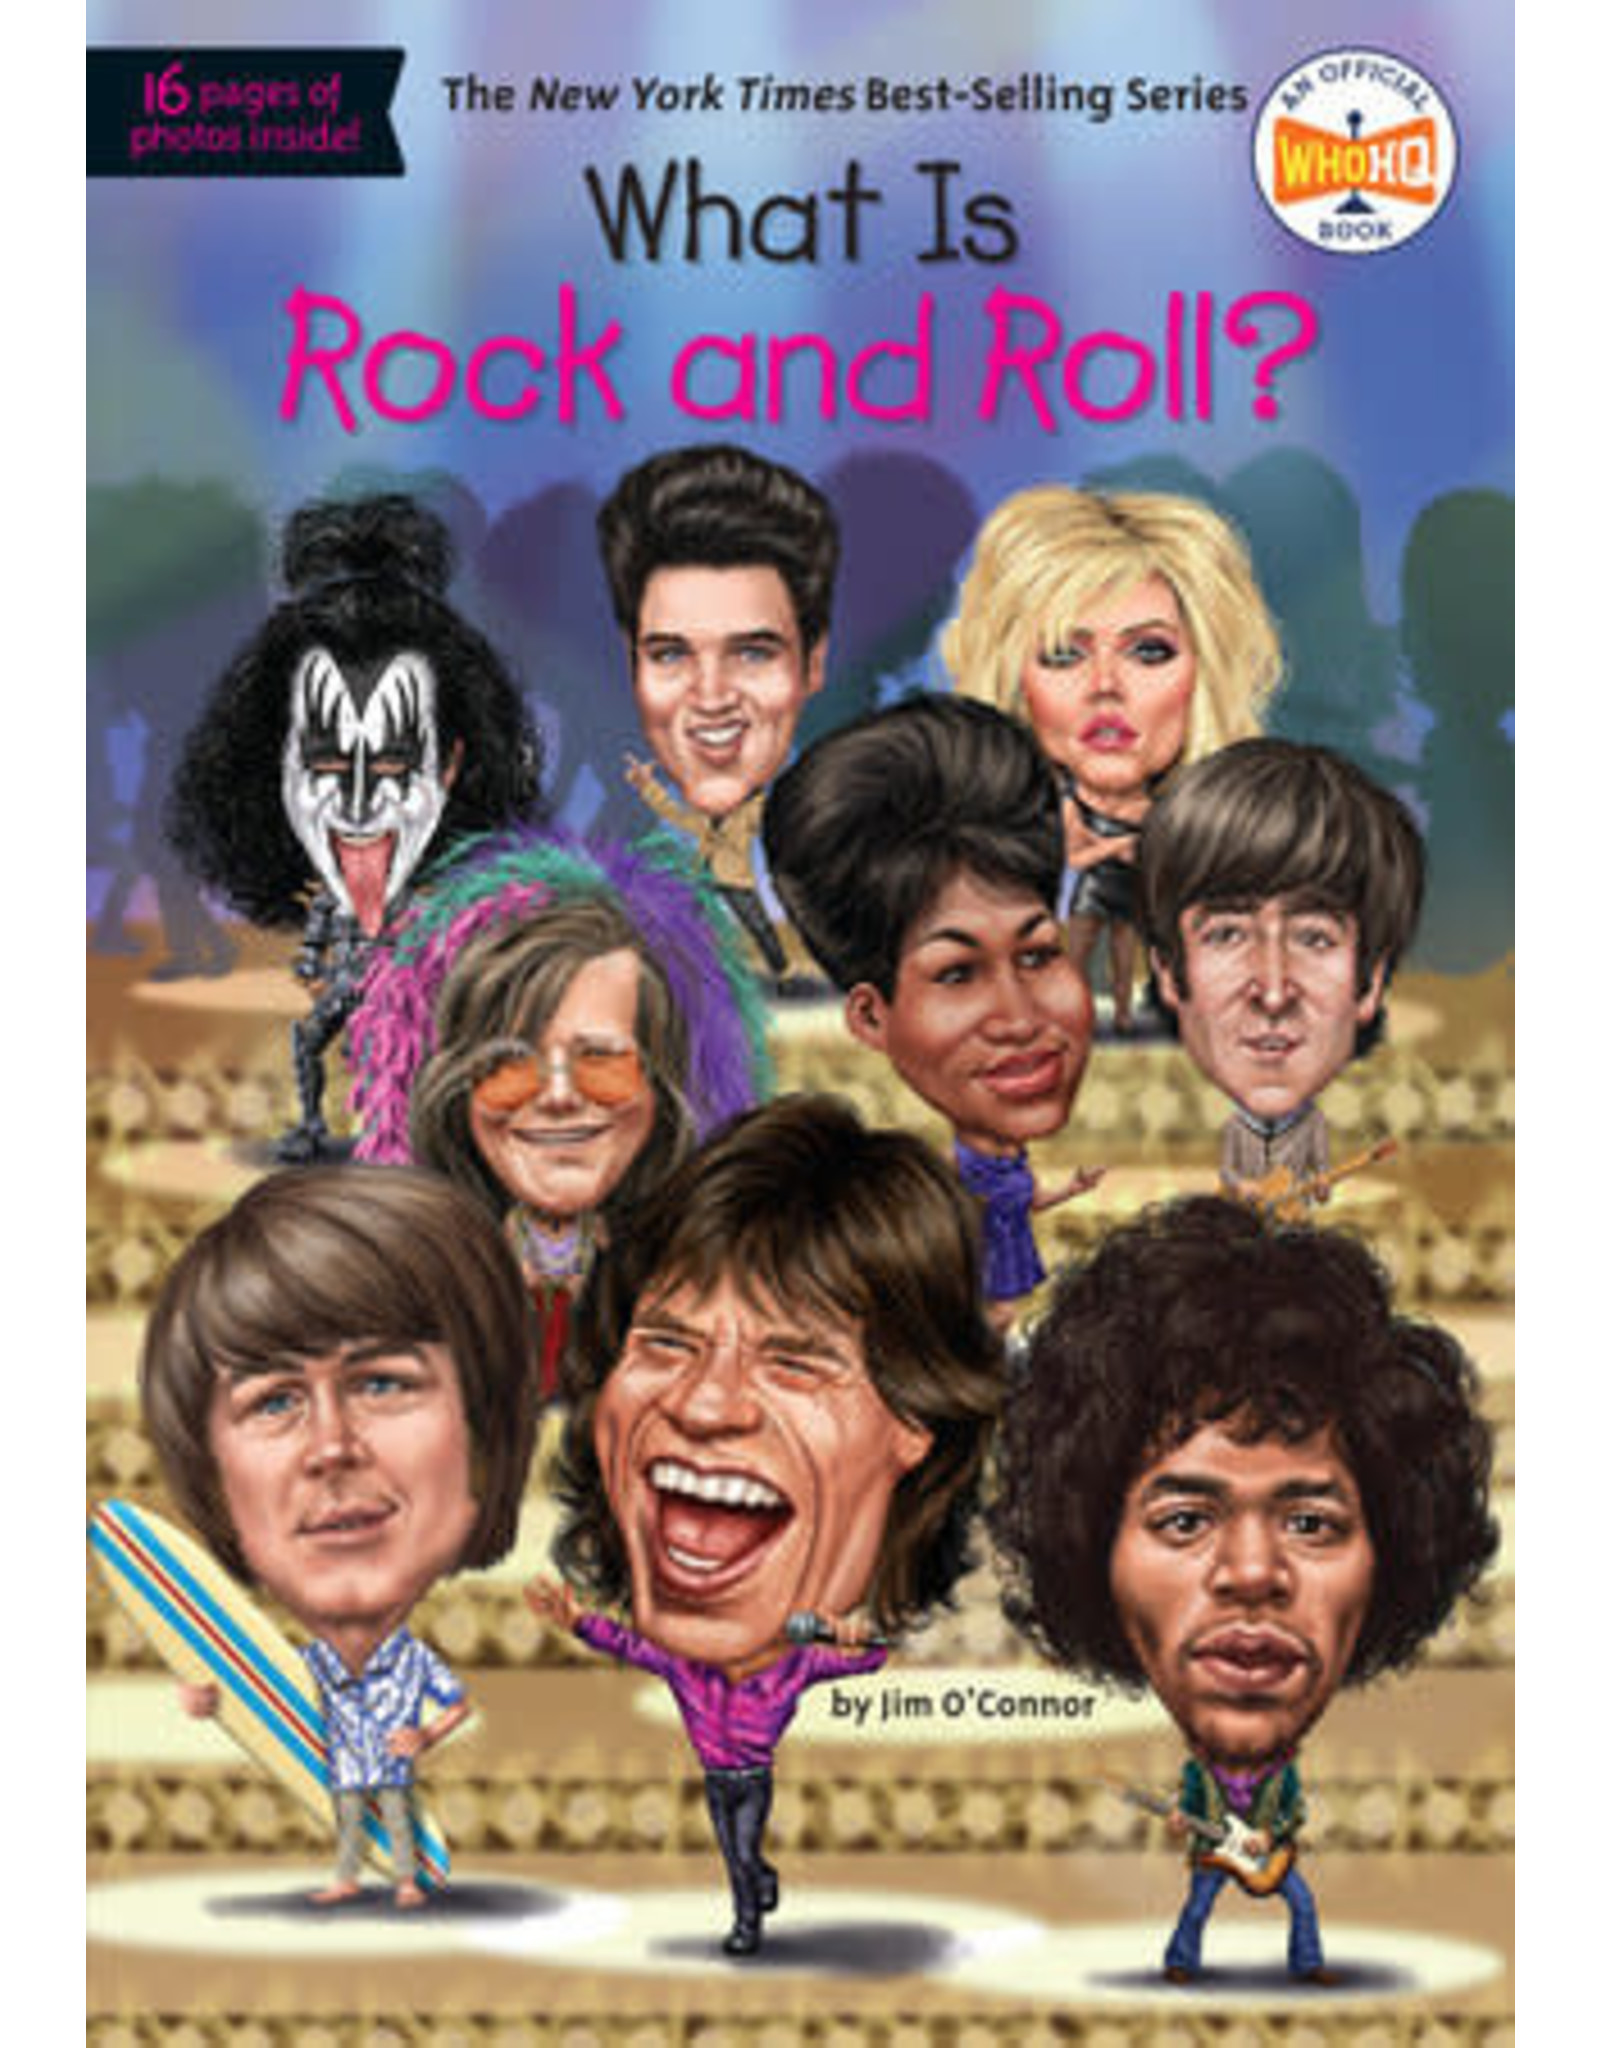 What is Rock and Roll?